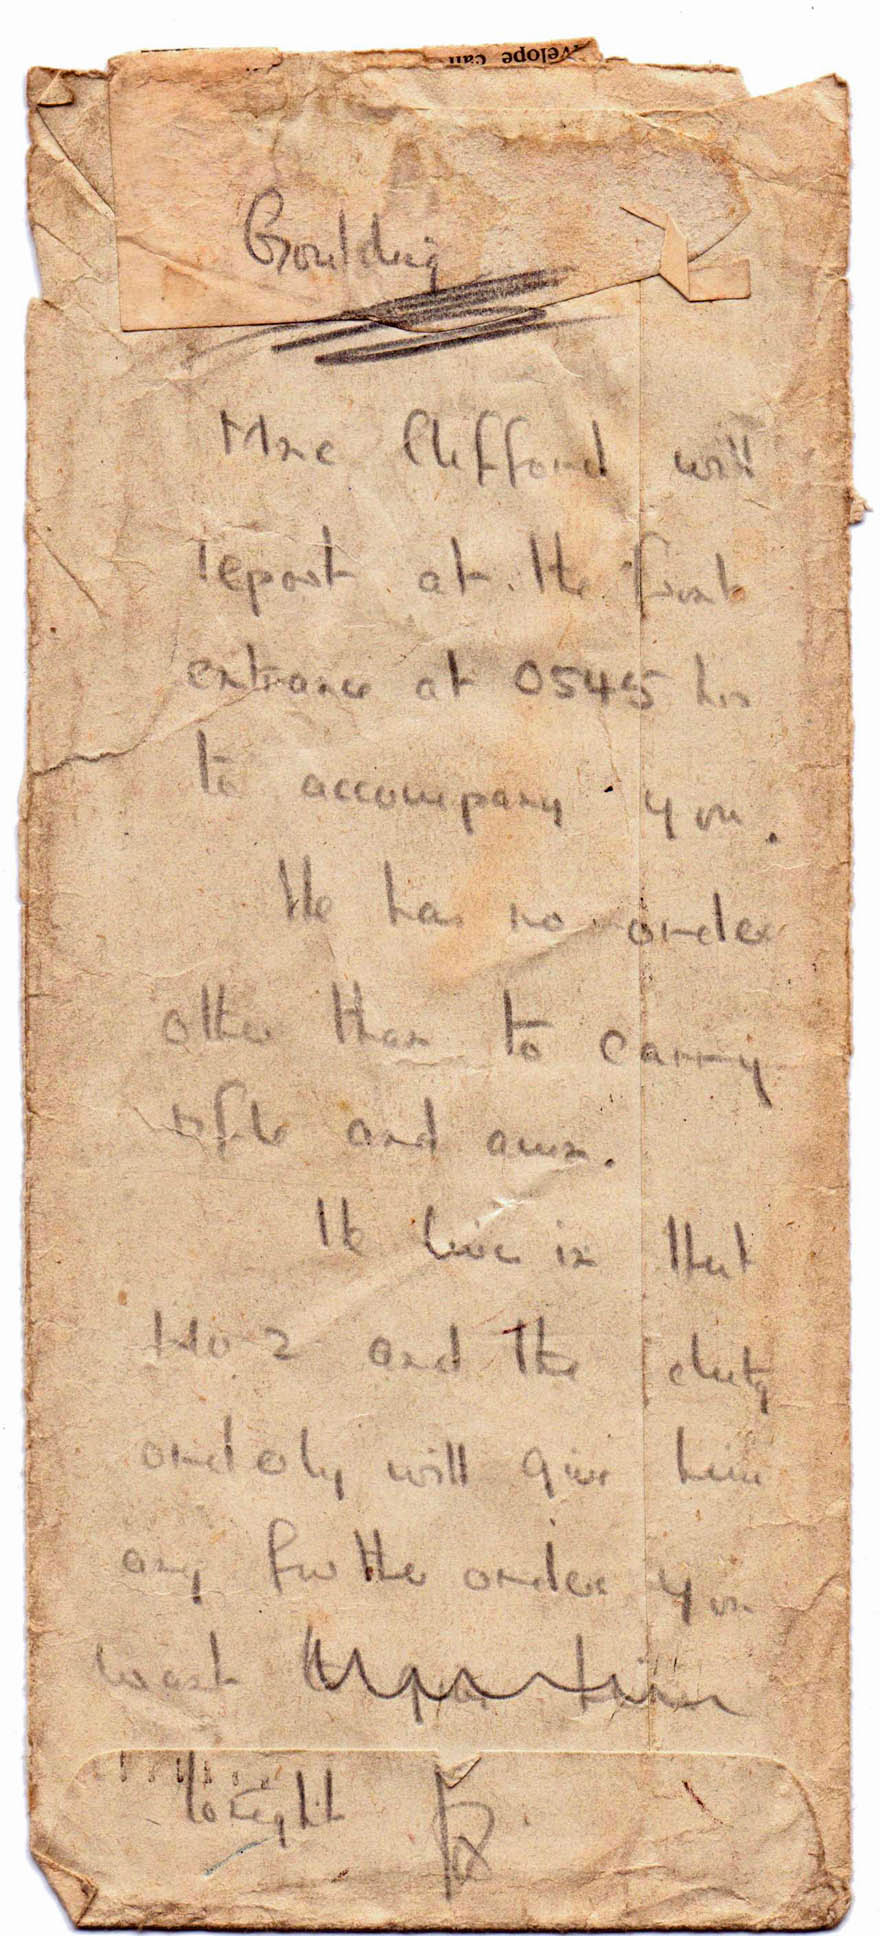 Handwritten note from Laycock to Cmdr. Goulding